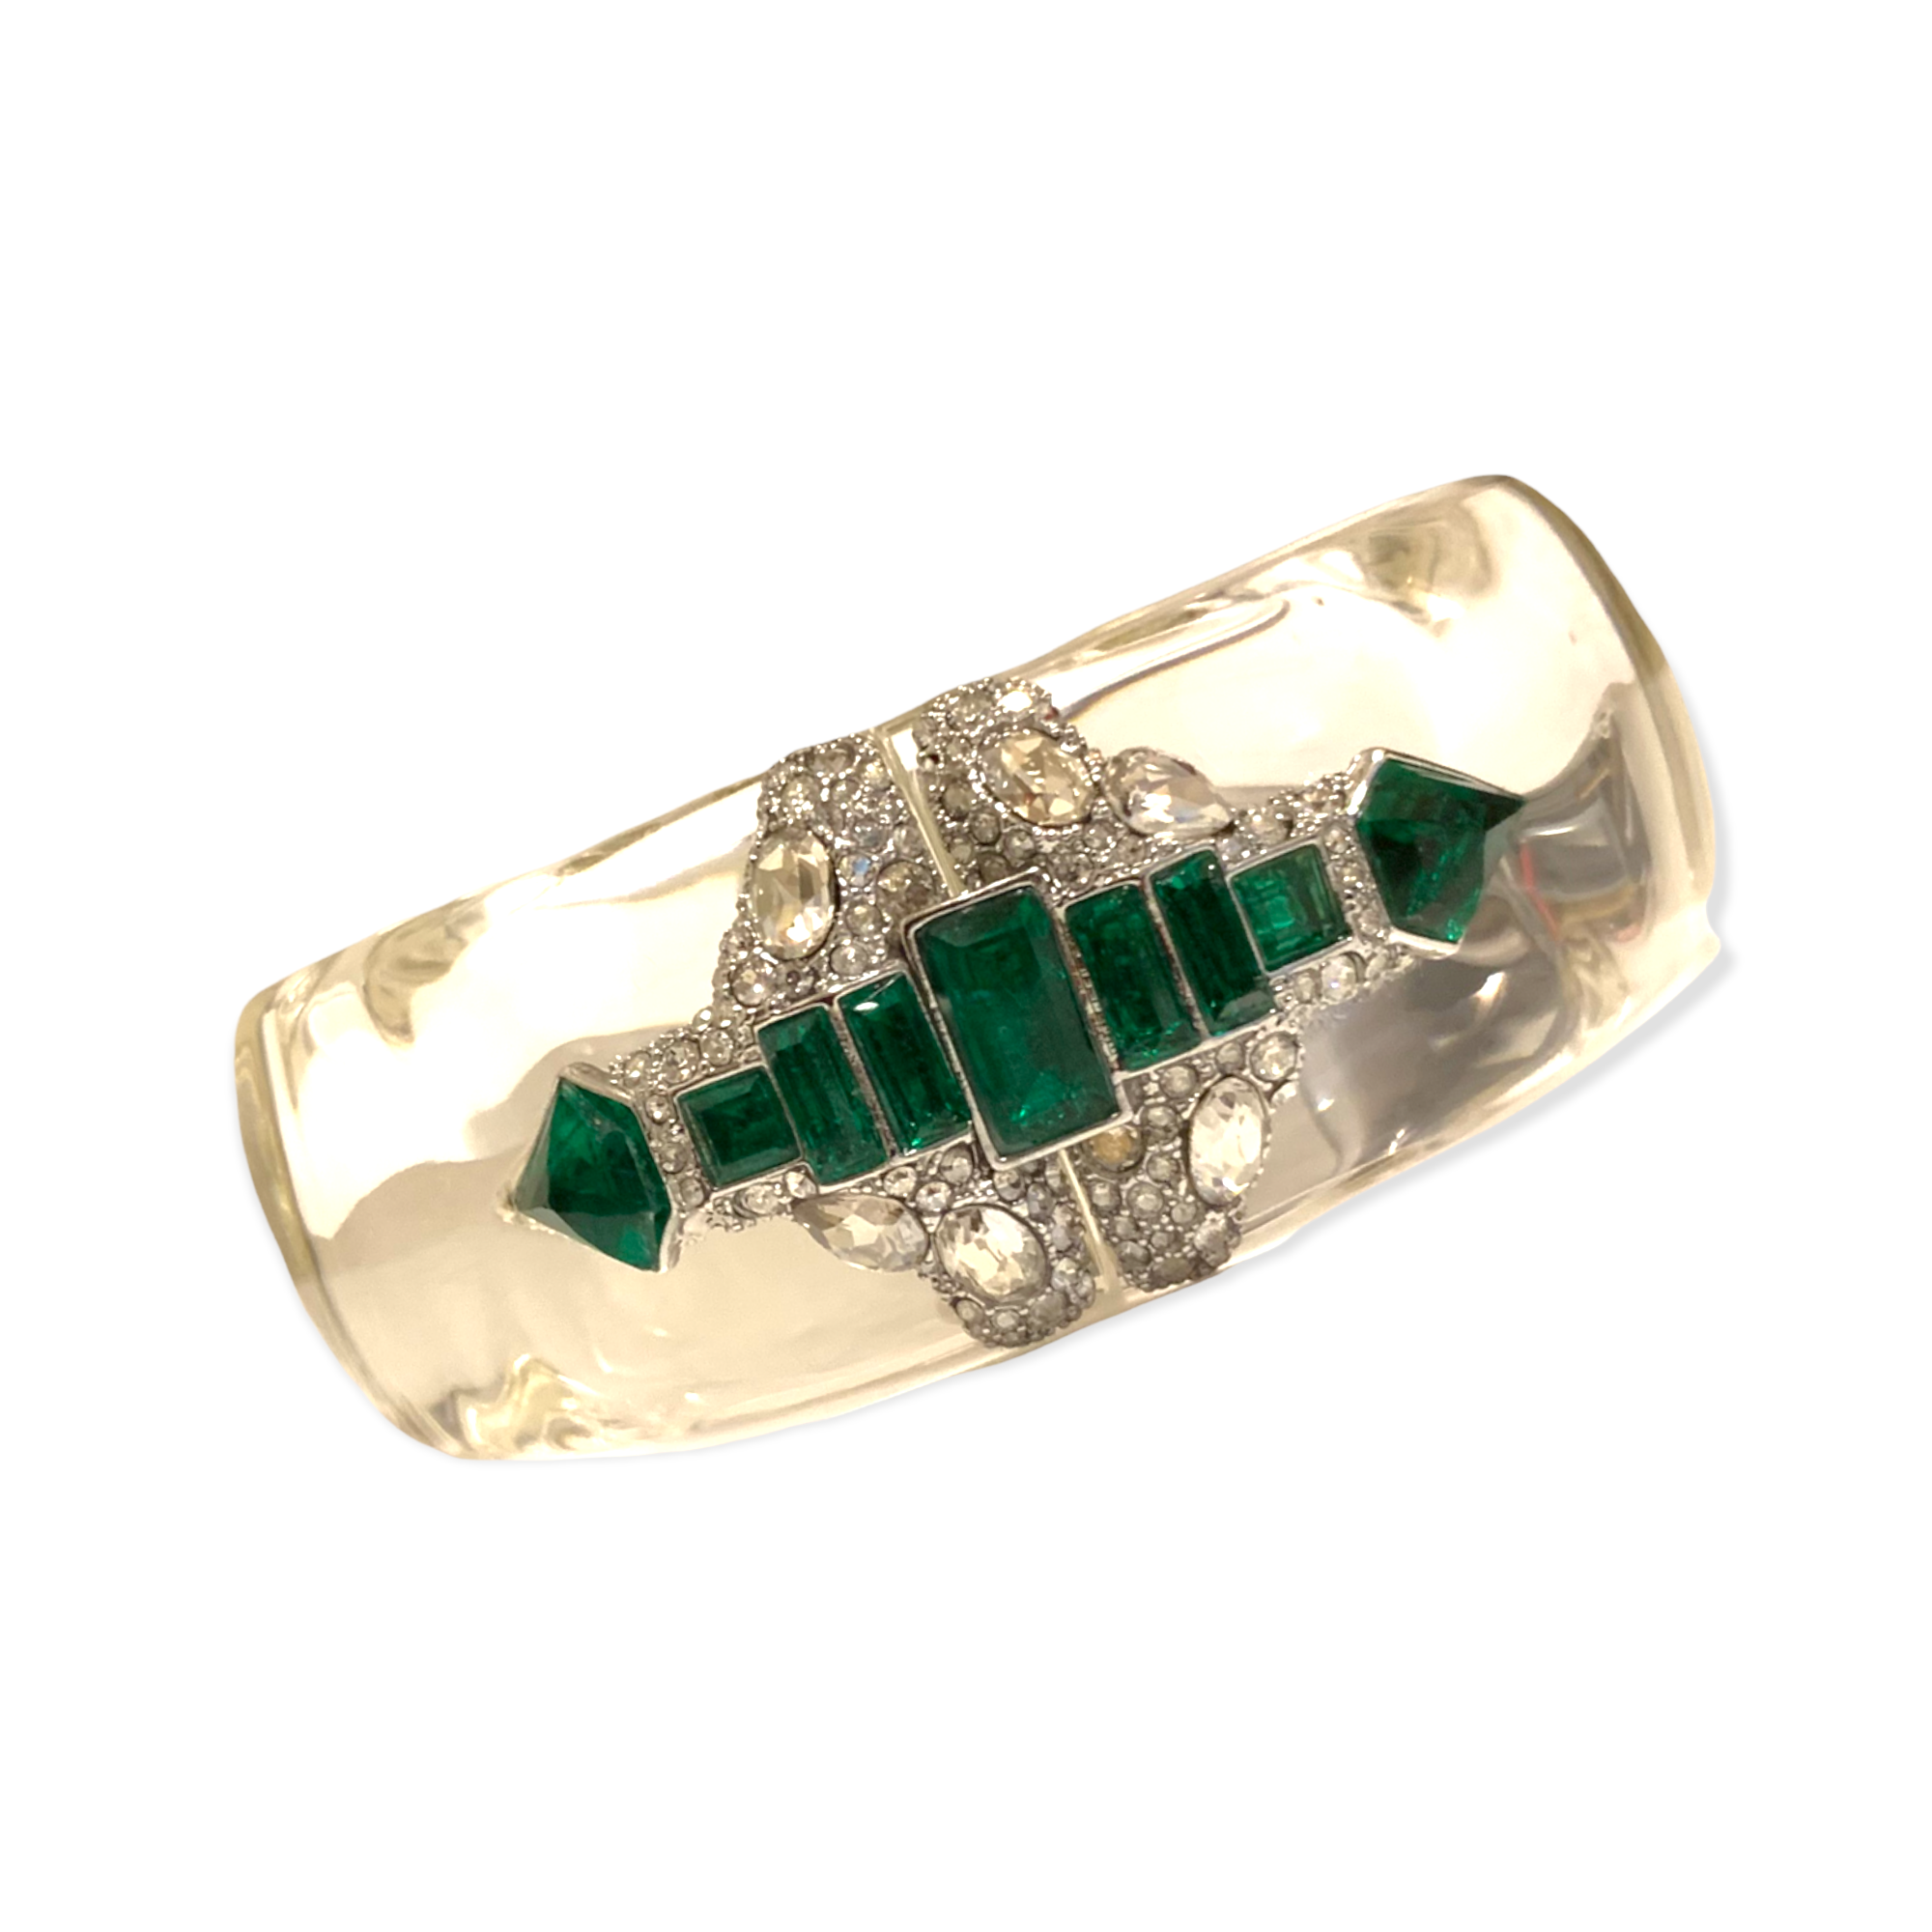 ALEXIS BITTAR Clear Lucite Bangle encrusted with Emerald Green & Clear Crystals